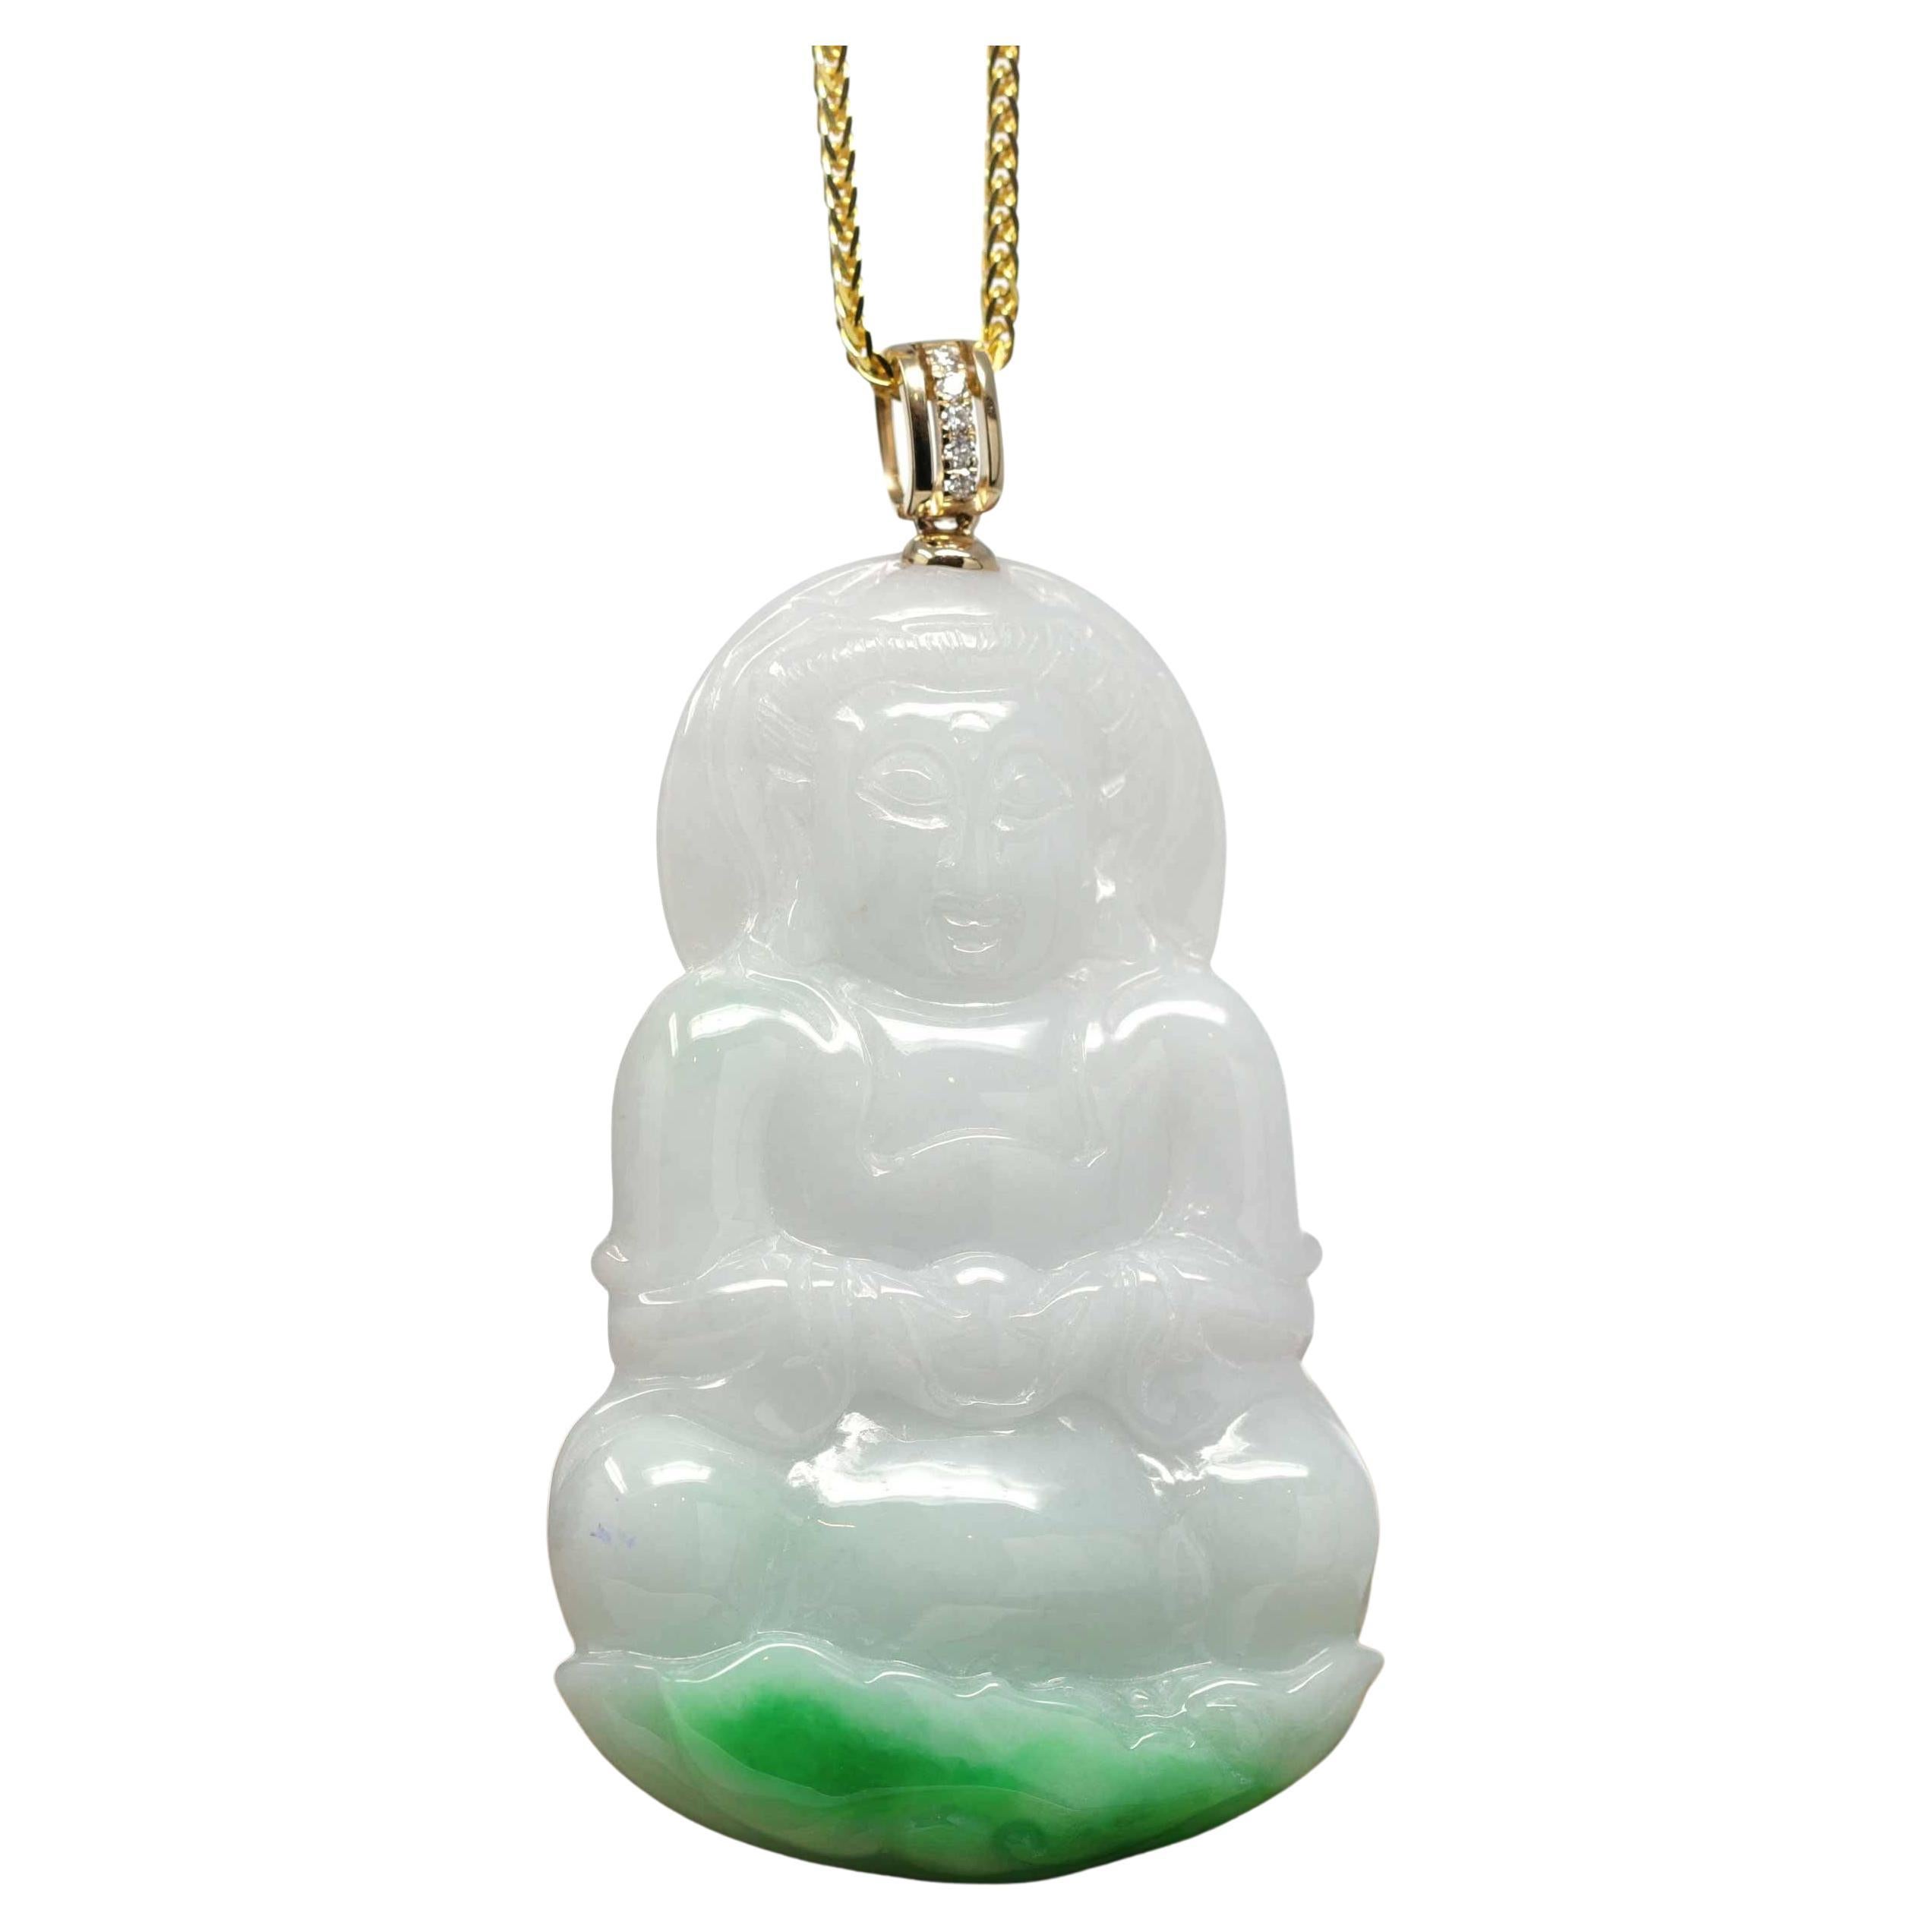 "Goddess of Compassion" Jadeite Jade Necklace with 14k Yellow Gold Diamond Bail  For Sale